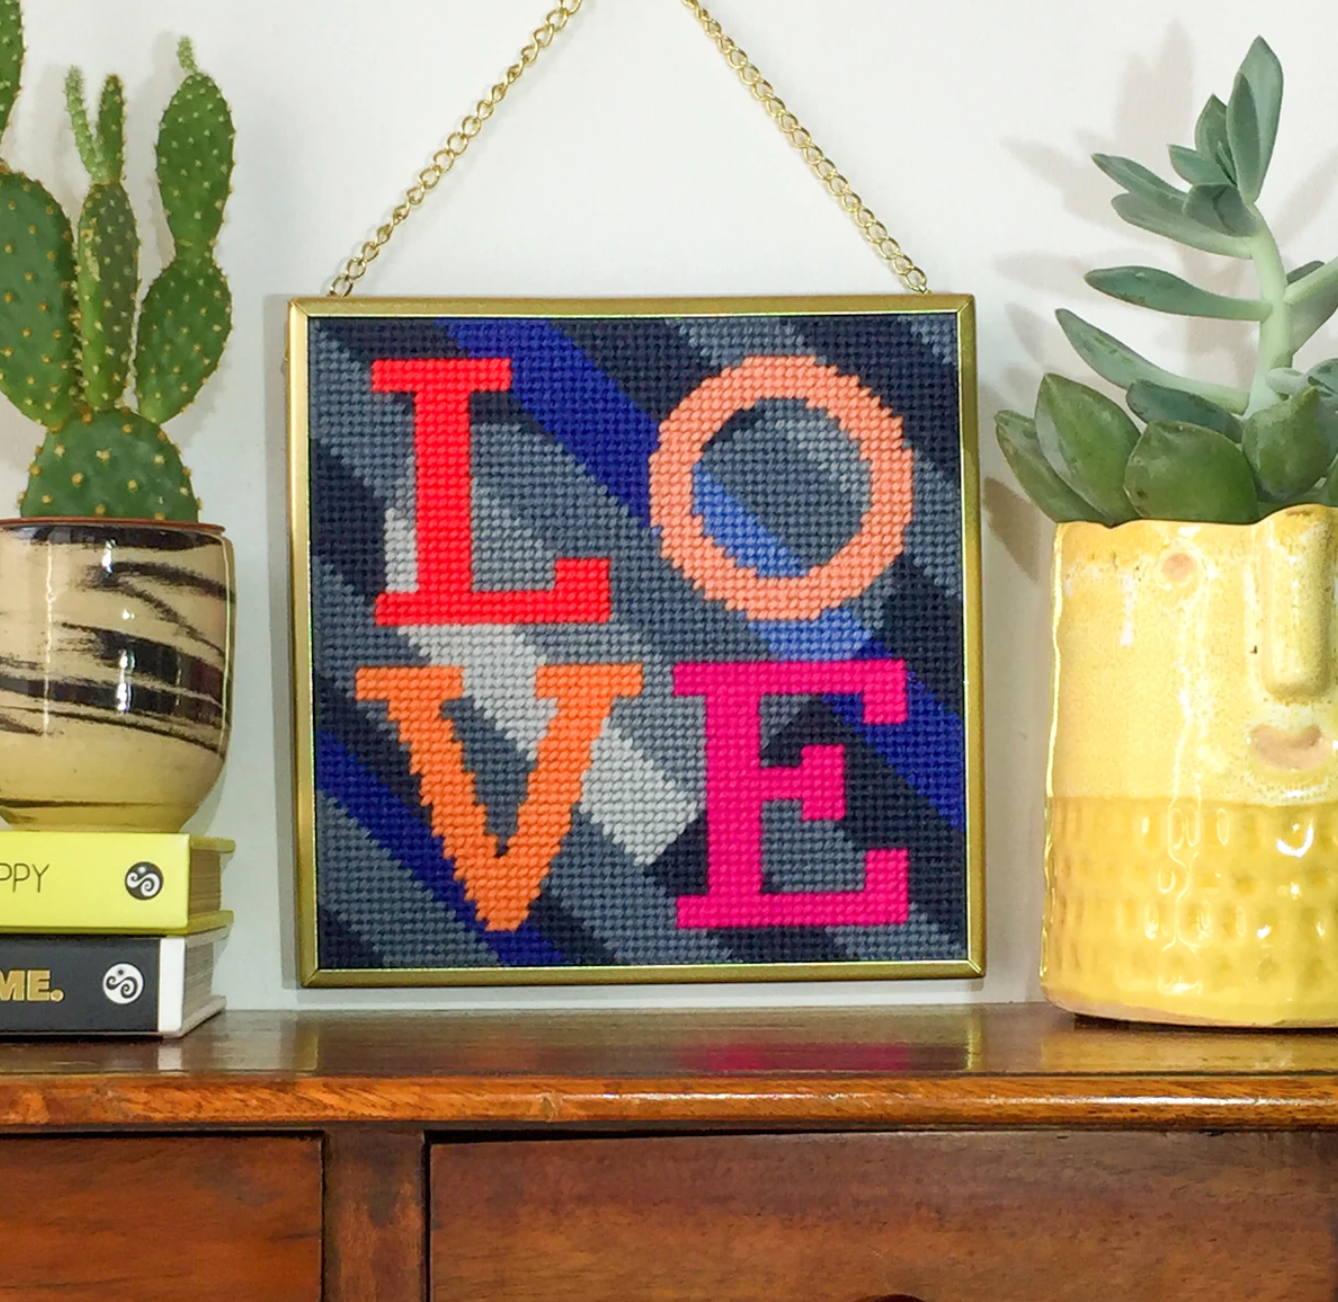 Needlepoint kit designed by Hannah Bass showing the word Love.